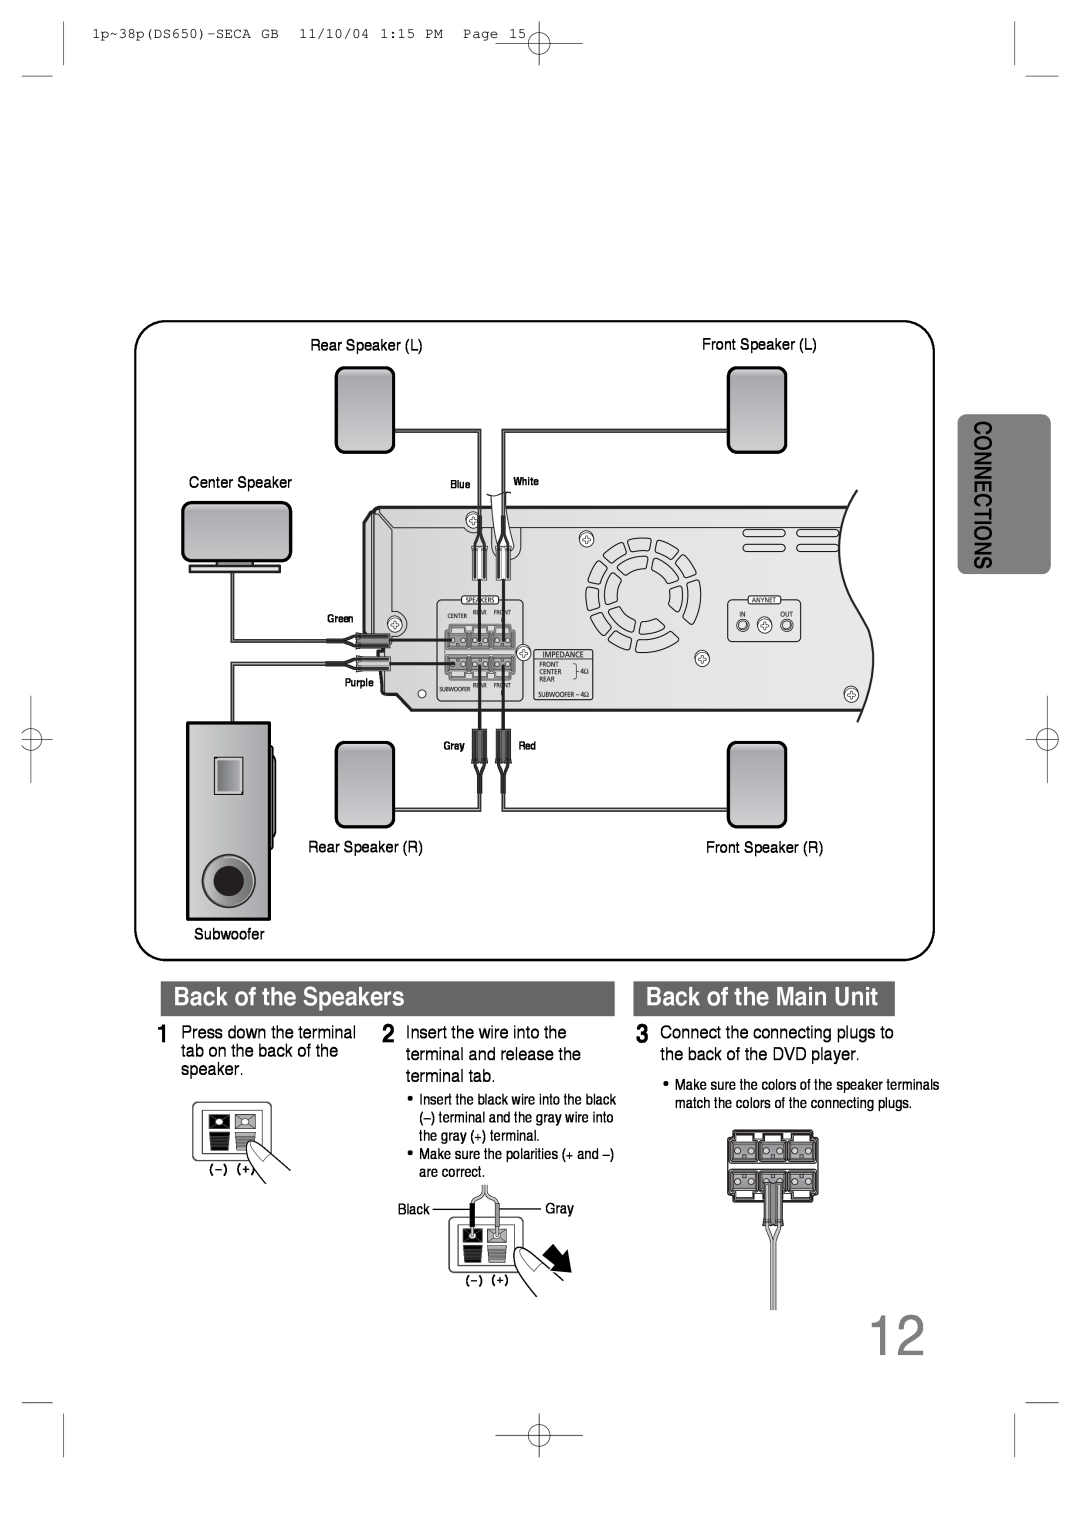 Samsung HT-DS650 instruction manual Back of the Speakers, Back of the Main Unit, Connections, Center Speaker 